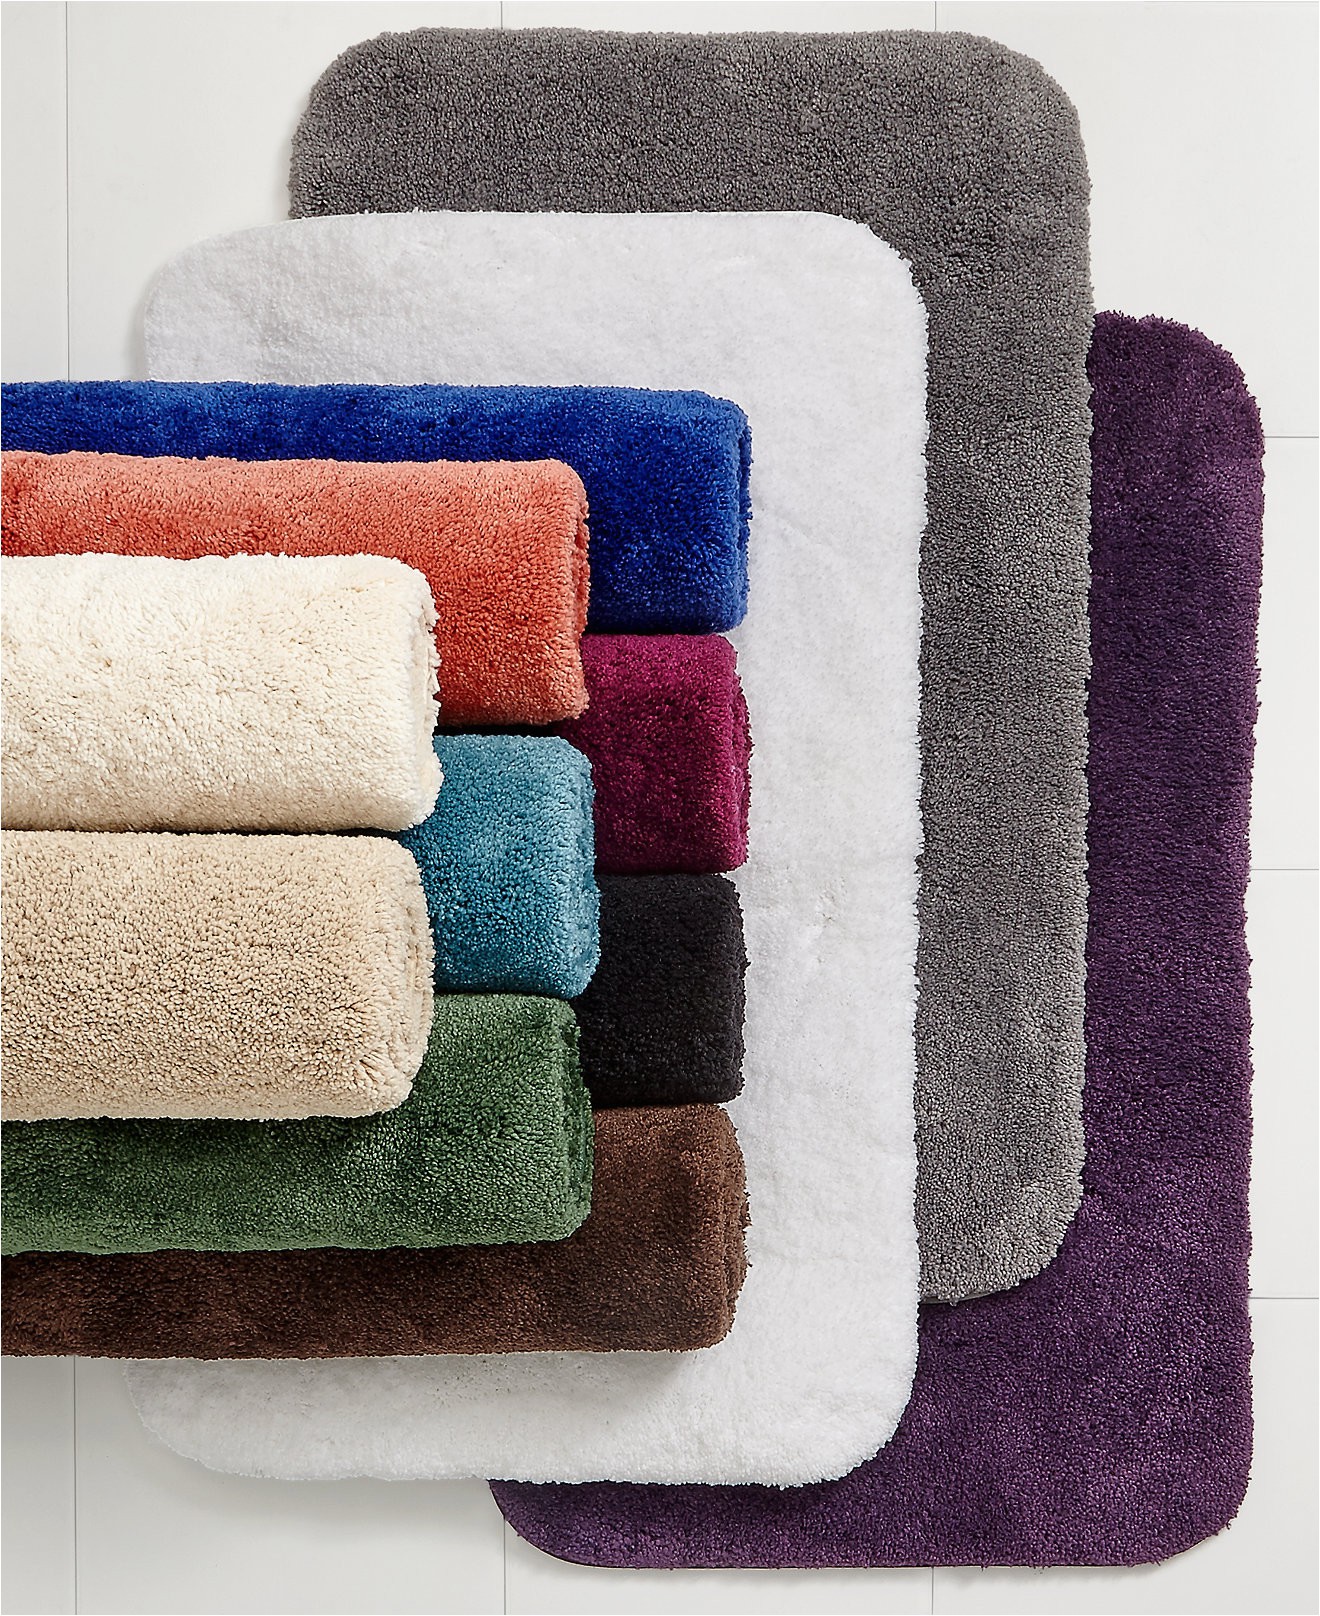 Jcpenney Red Bathroom Rugs Jcpenney Bathroom Rugs and towels Image Of Bathroom and Closet